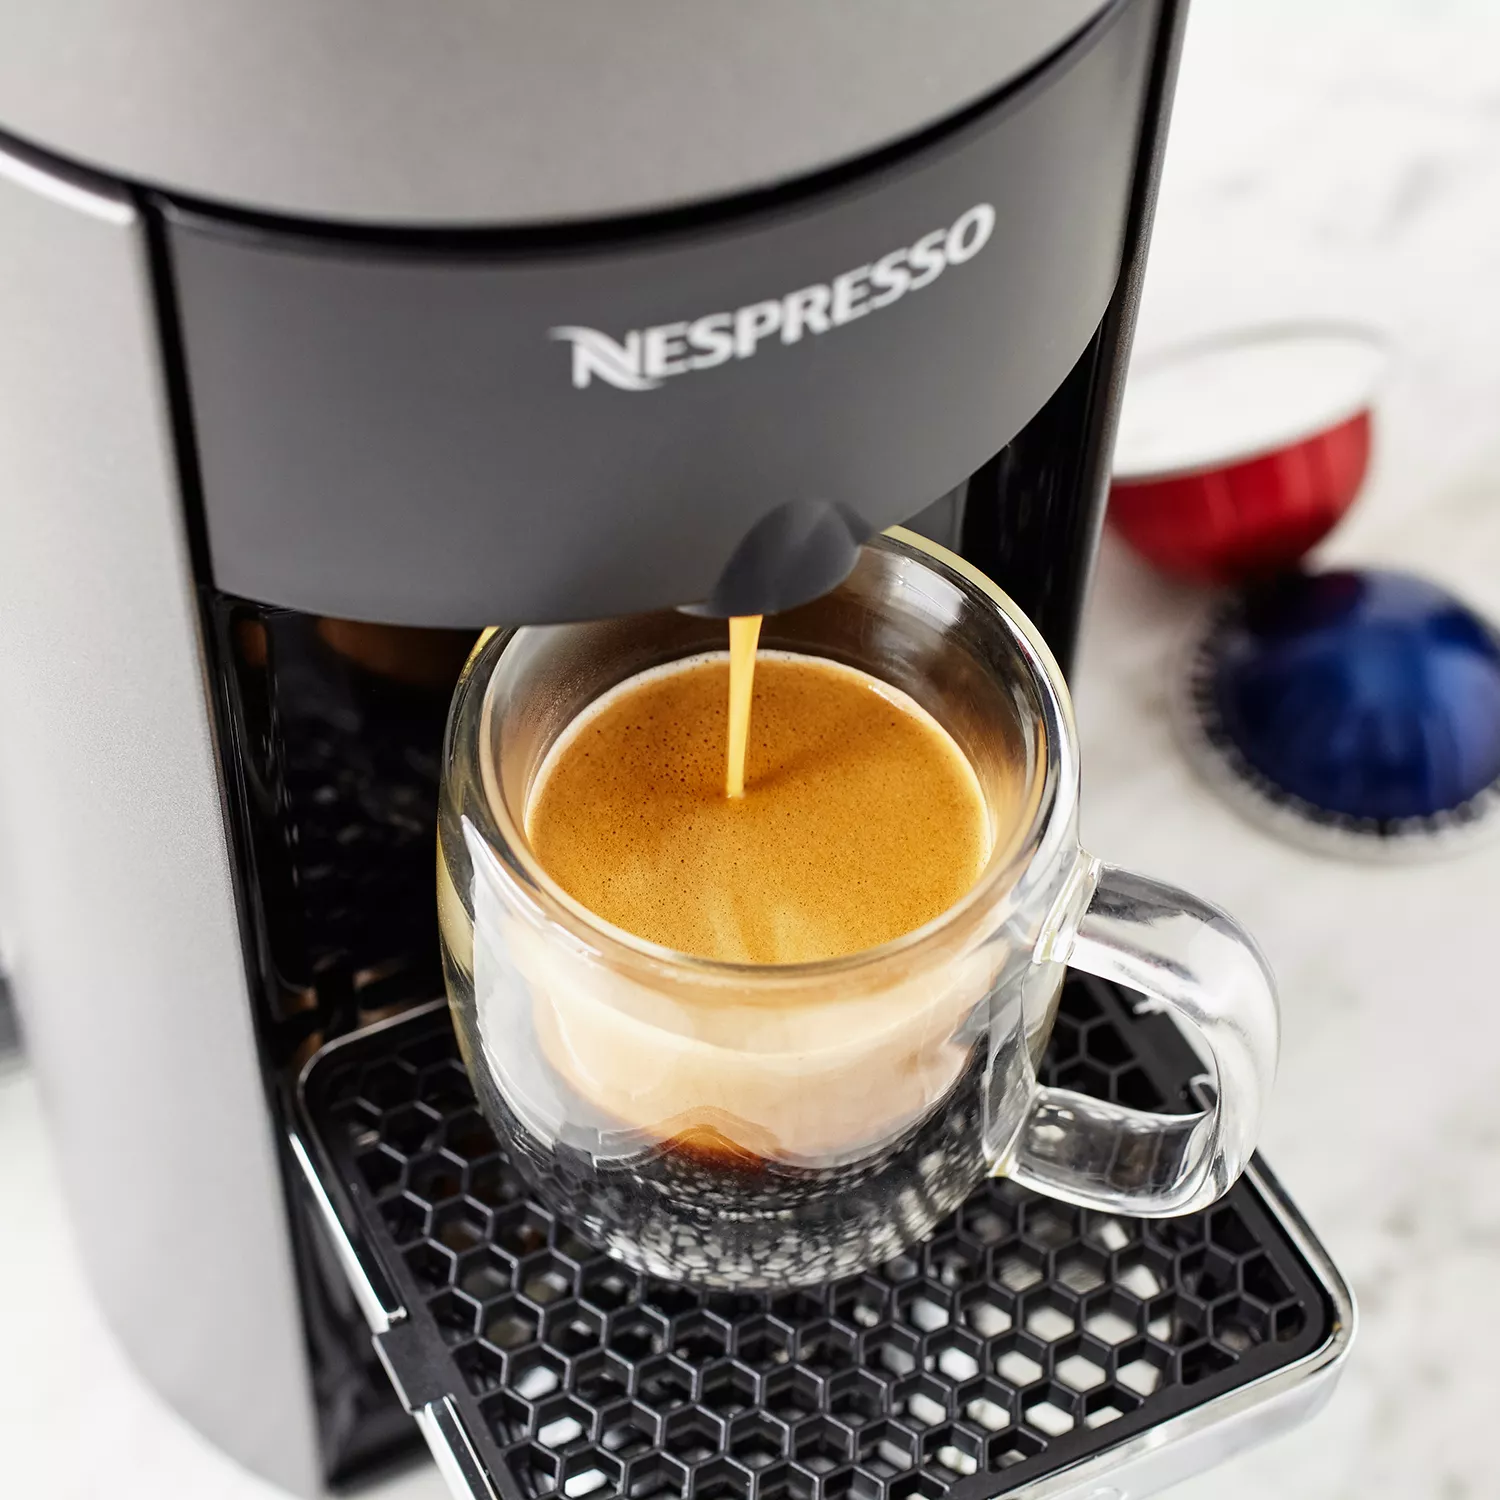 Nespresso Vertuo Evoluo Coffee Machine with Milk Frother 